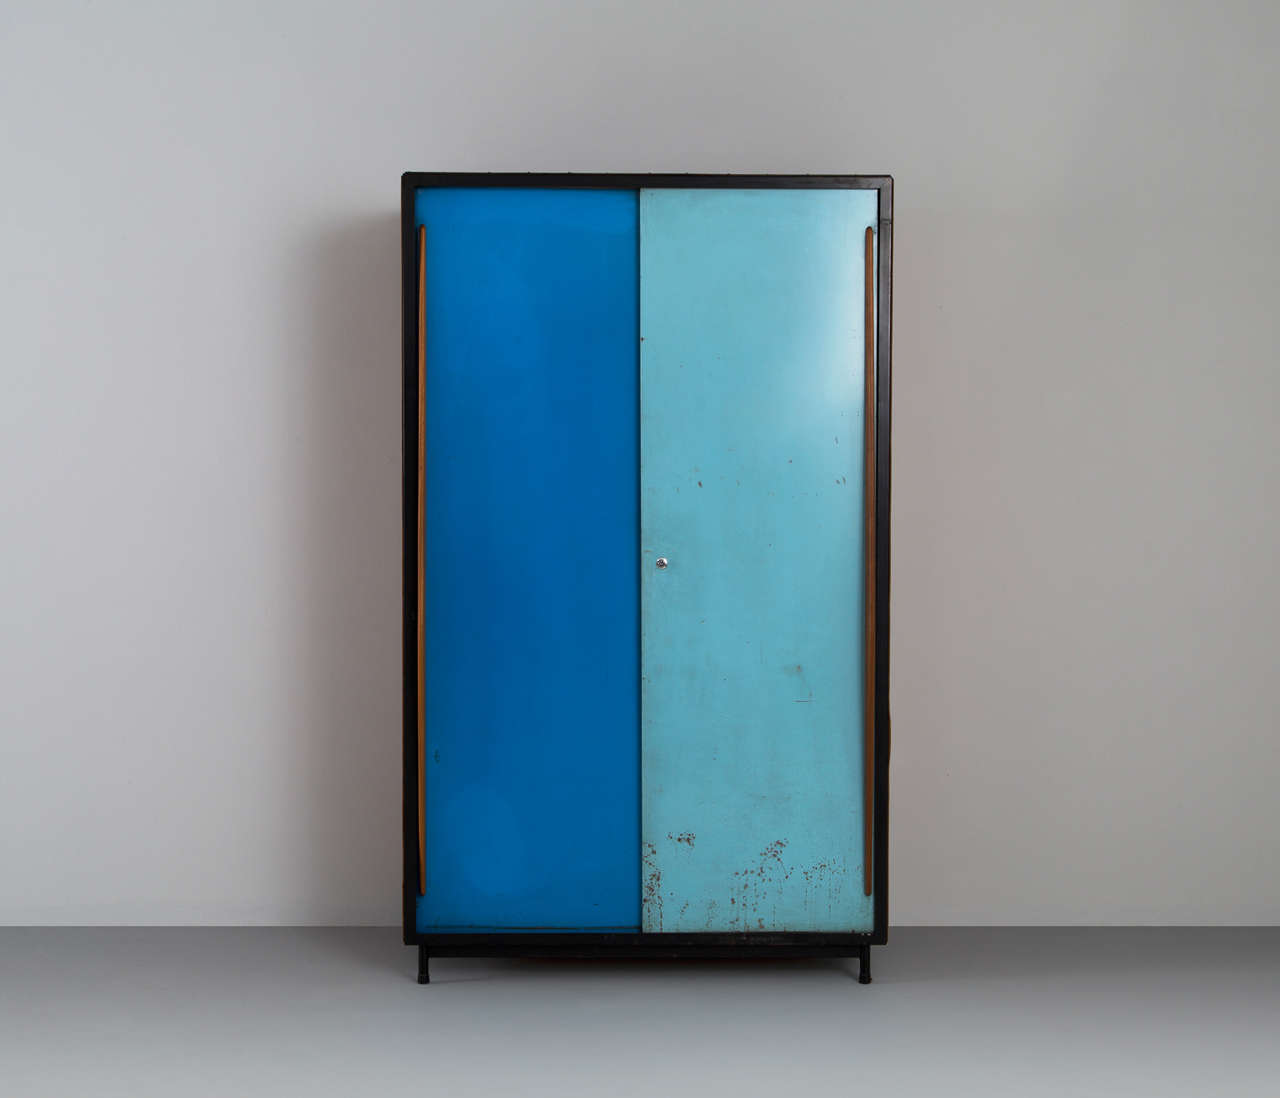 Nice early example of industrial design from the Belgium modernist stream, designed by Willy van der Meeren, Belgium, 1950s. Designed for use in school buildings and nowadays used for every kind of application.

Contains two drawers at each side,